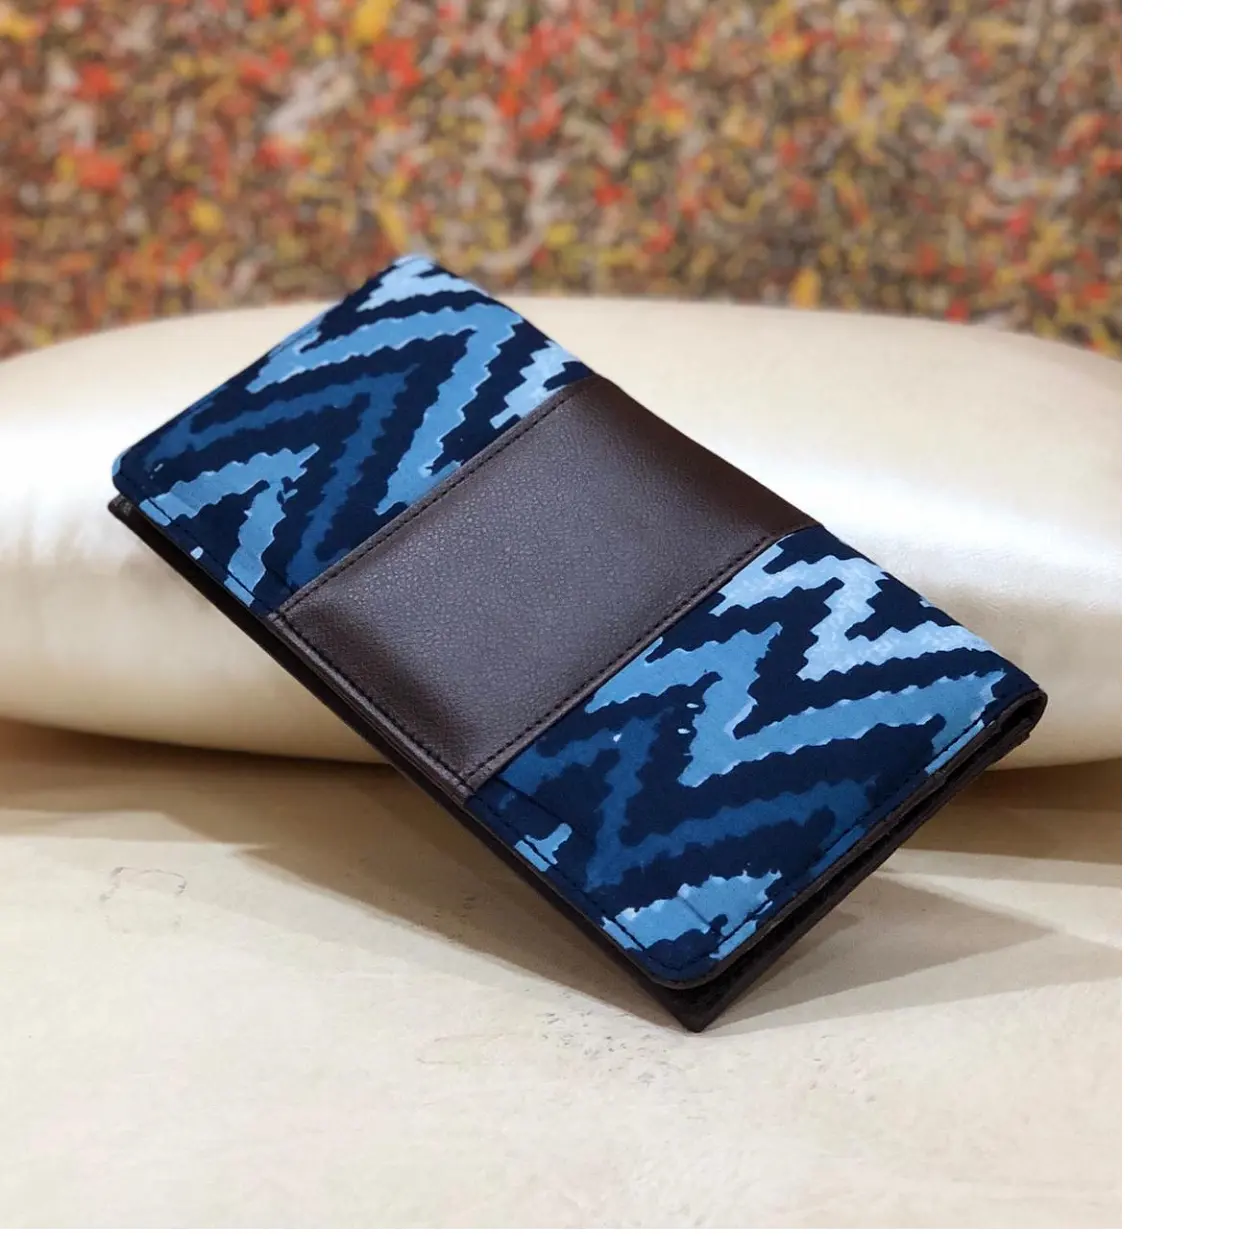 block printed cotton fabric covered wallets with an ikat theme suitable for women's fashion retailers